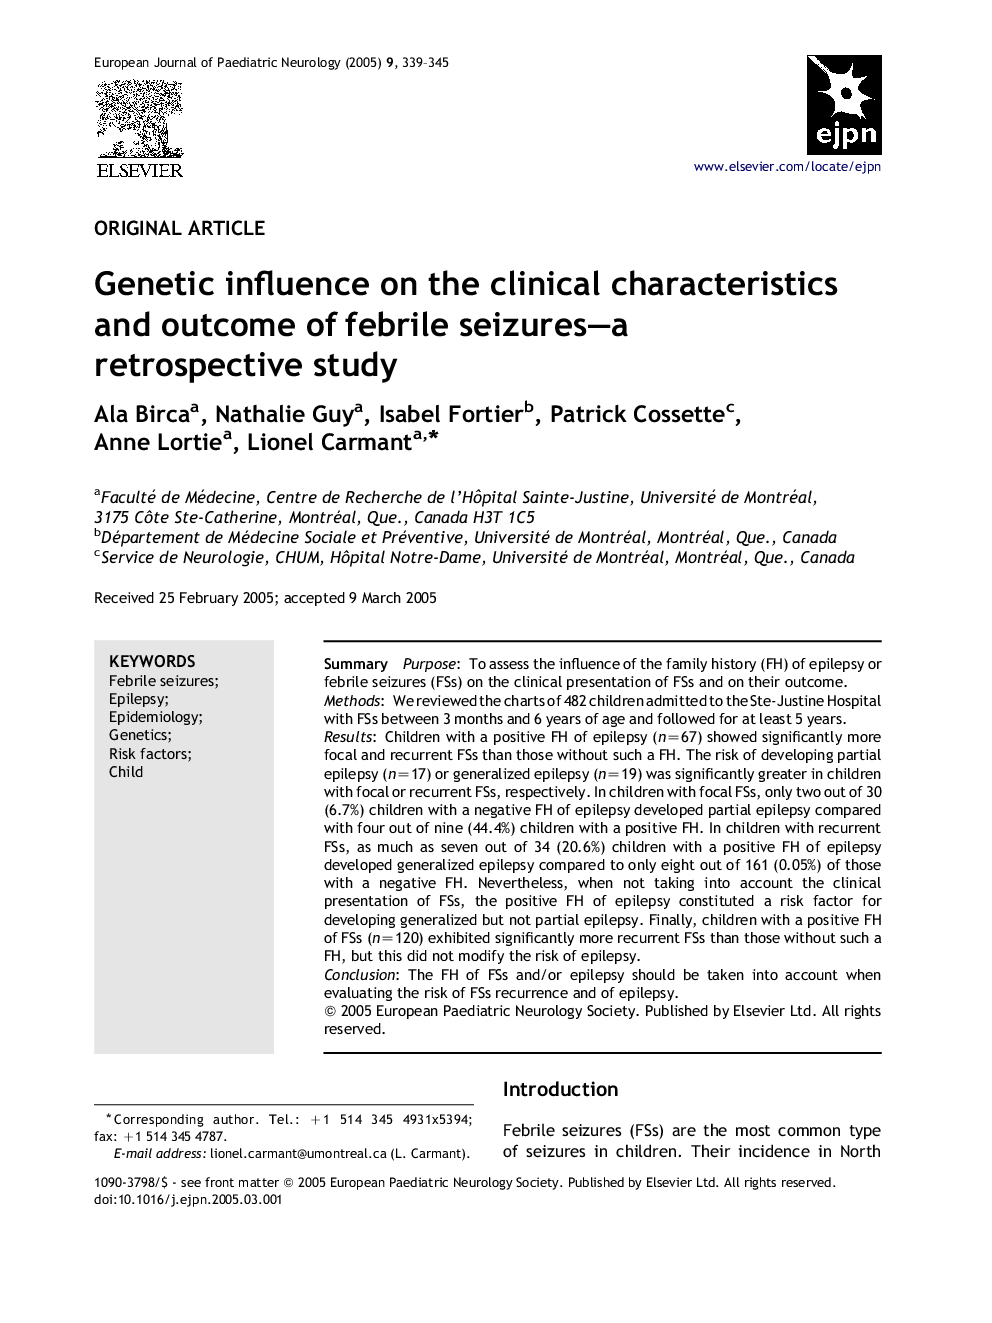 Genetic influence on the clinical characteristics and outcome of febrile seizures-a retrospective study